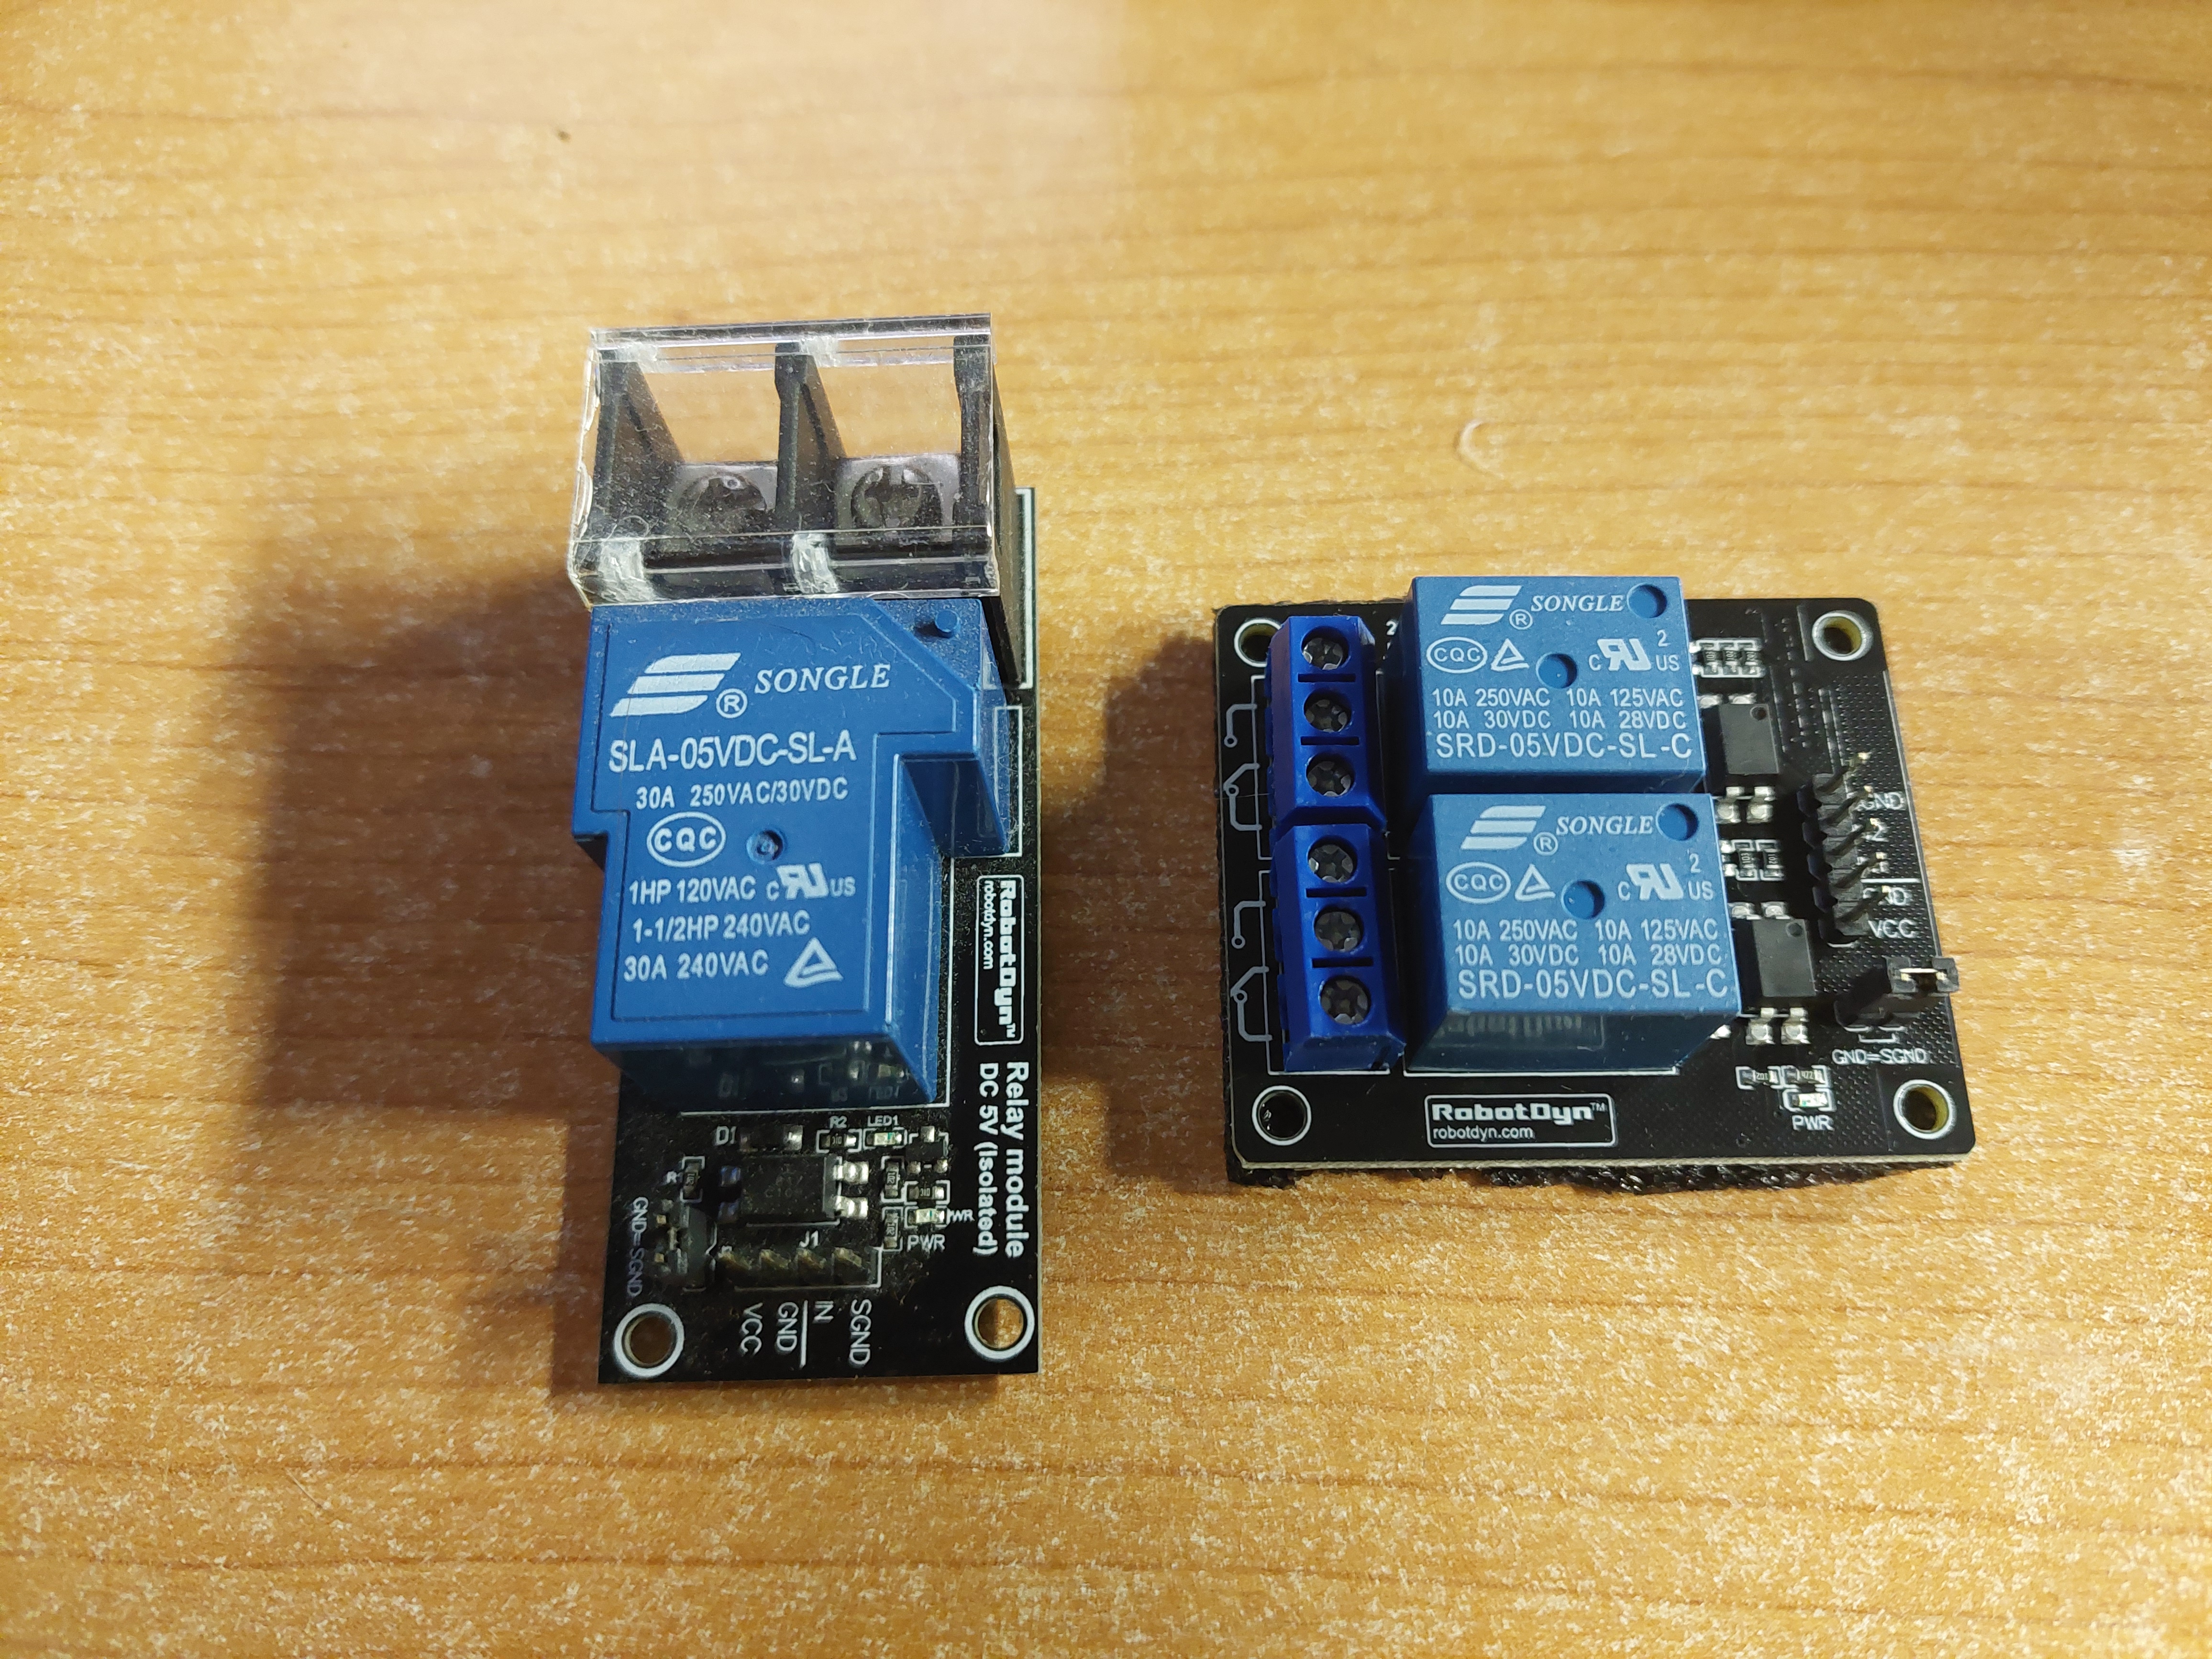 Chinise relay modules.